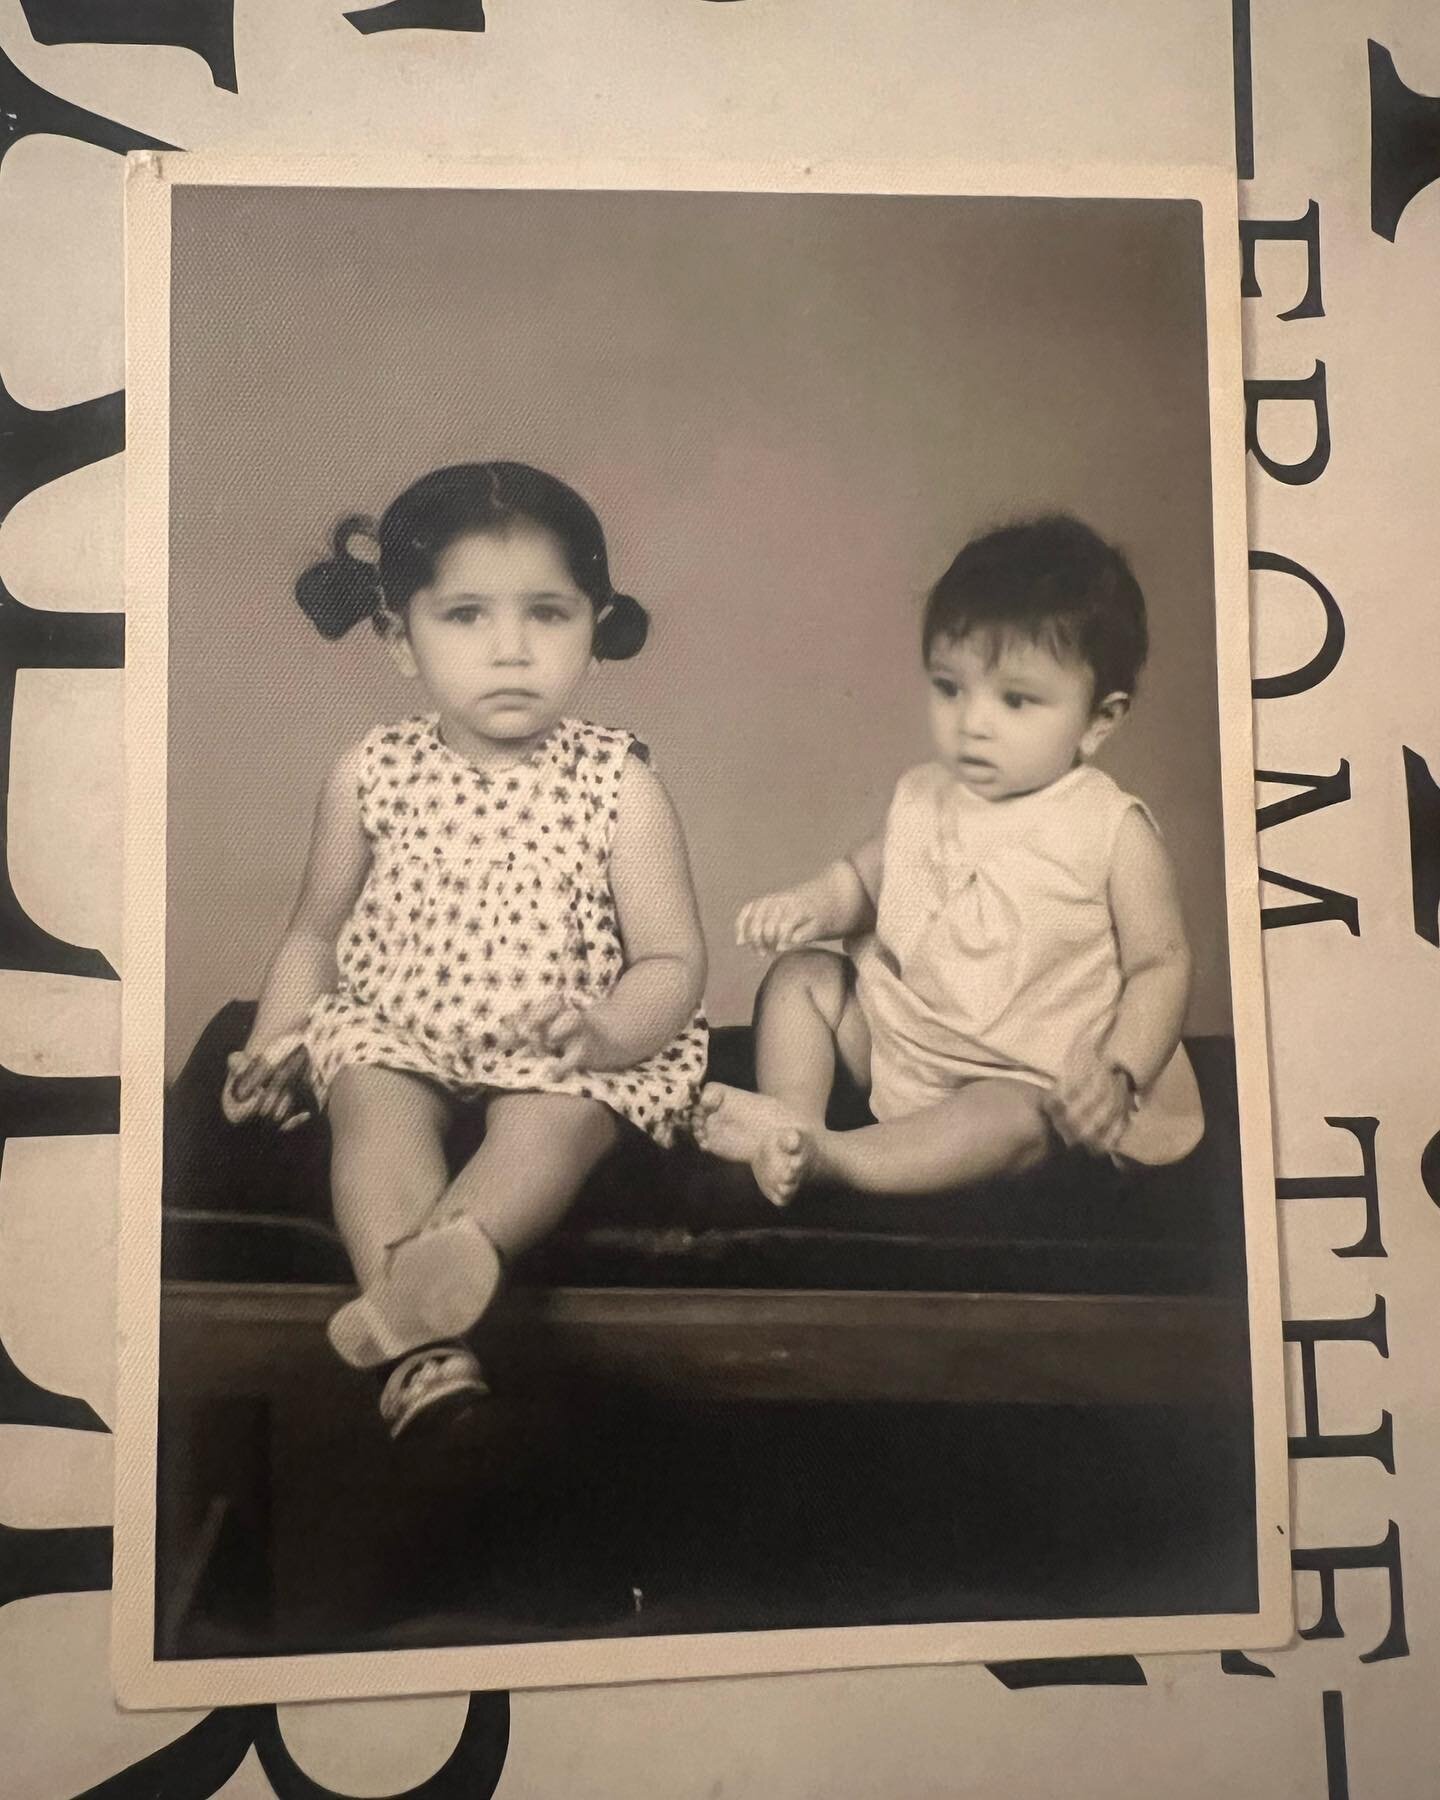 Little me (printed dress) with my cousin in 1971
Gorgeous Ami and dapper Baba in Paris in 1982
With my sisters and Baba in 1975 in my school uniform (always loved a mini:)
.
.
.
.
.
.
.
.
.
.
.
.
.
.
#sobiaashaikh #oldpics #memorylane #contentcreator